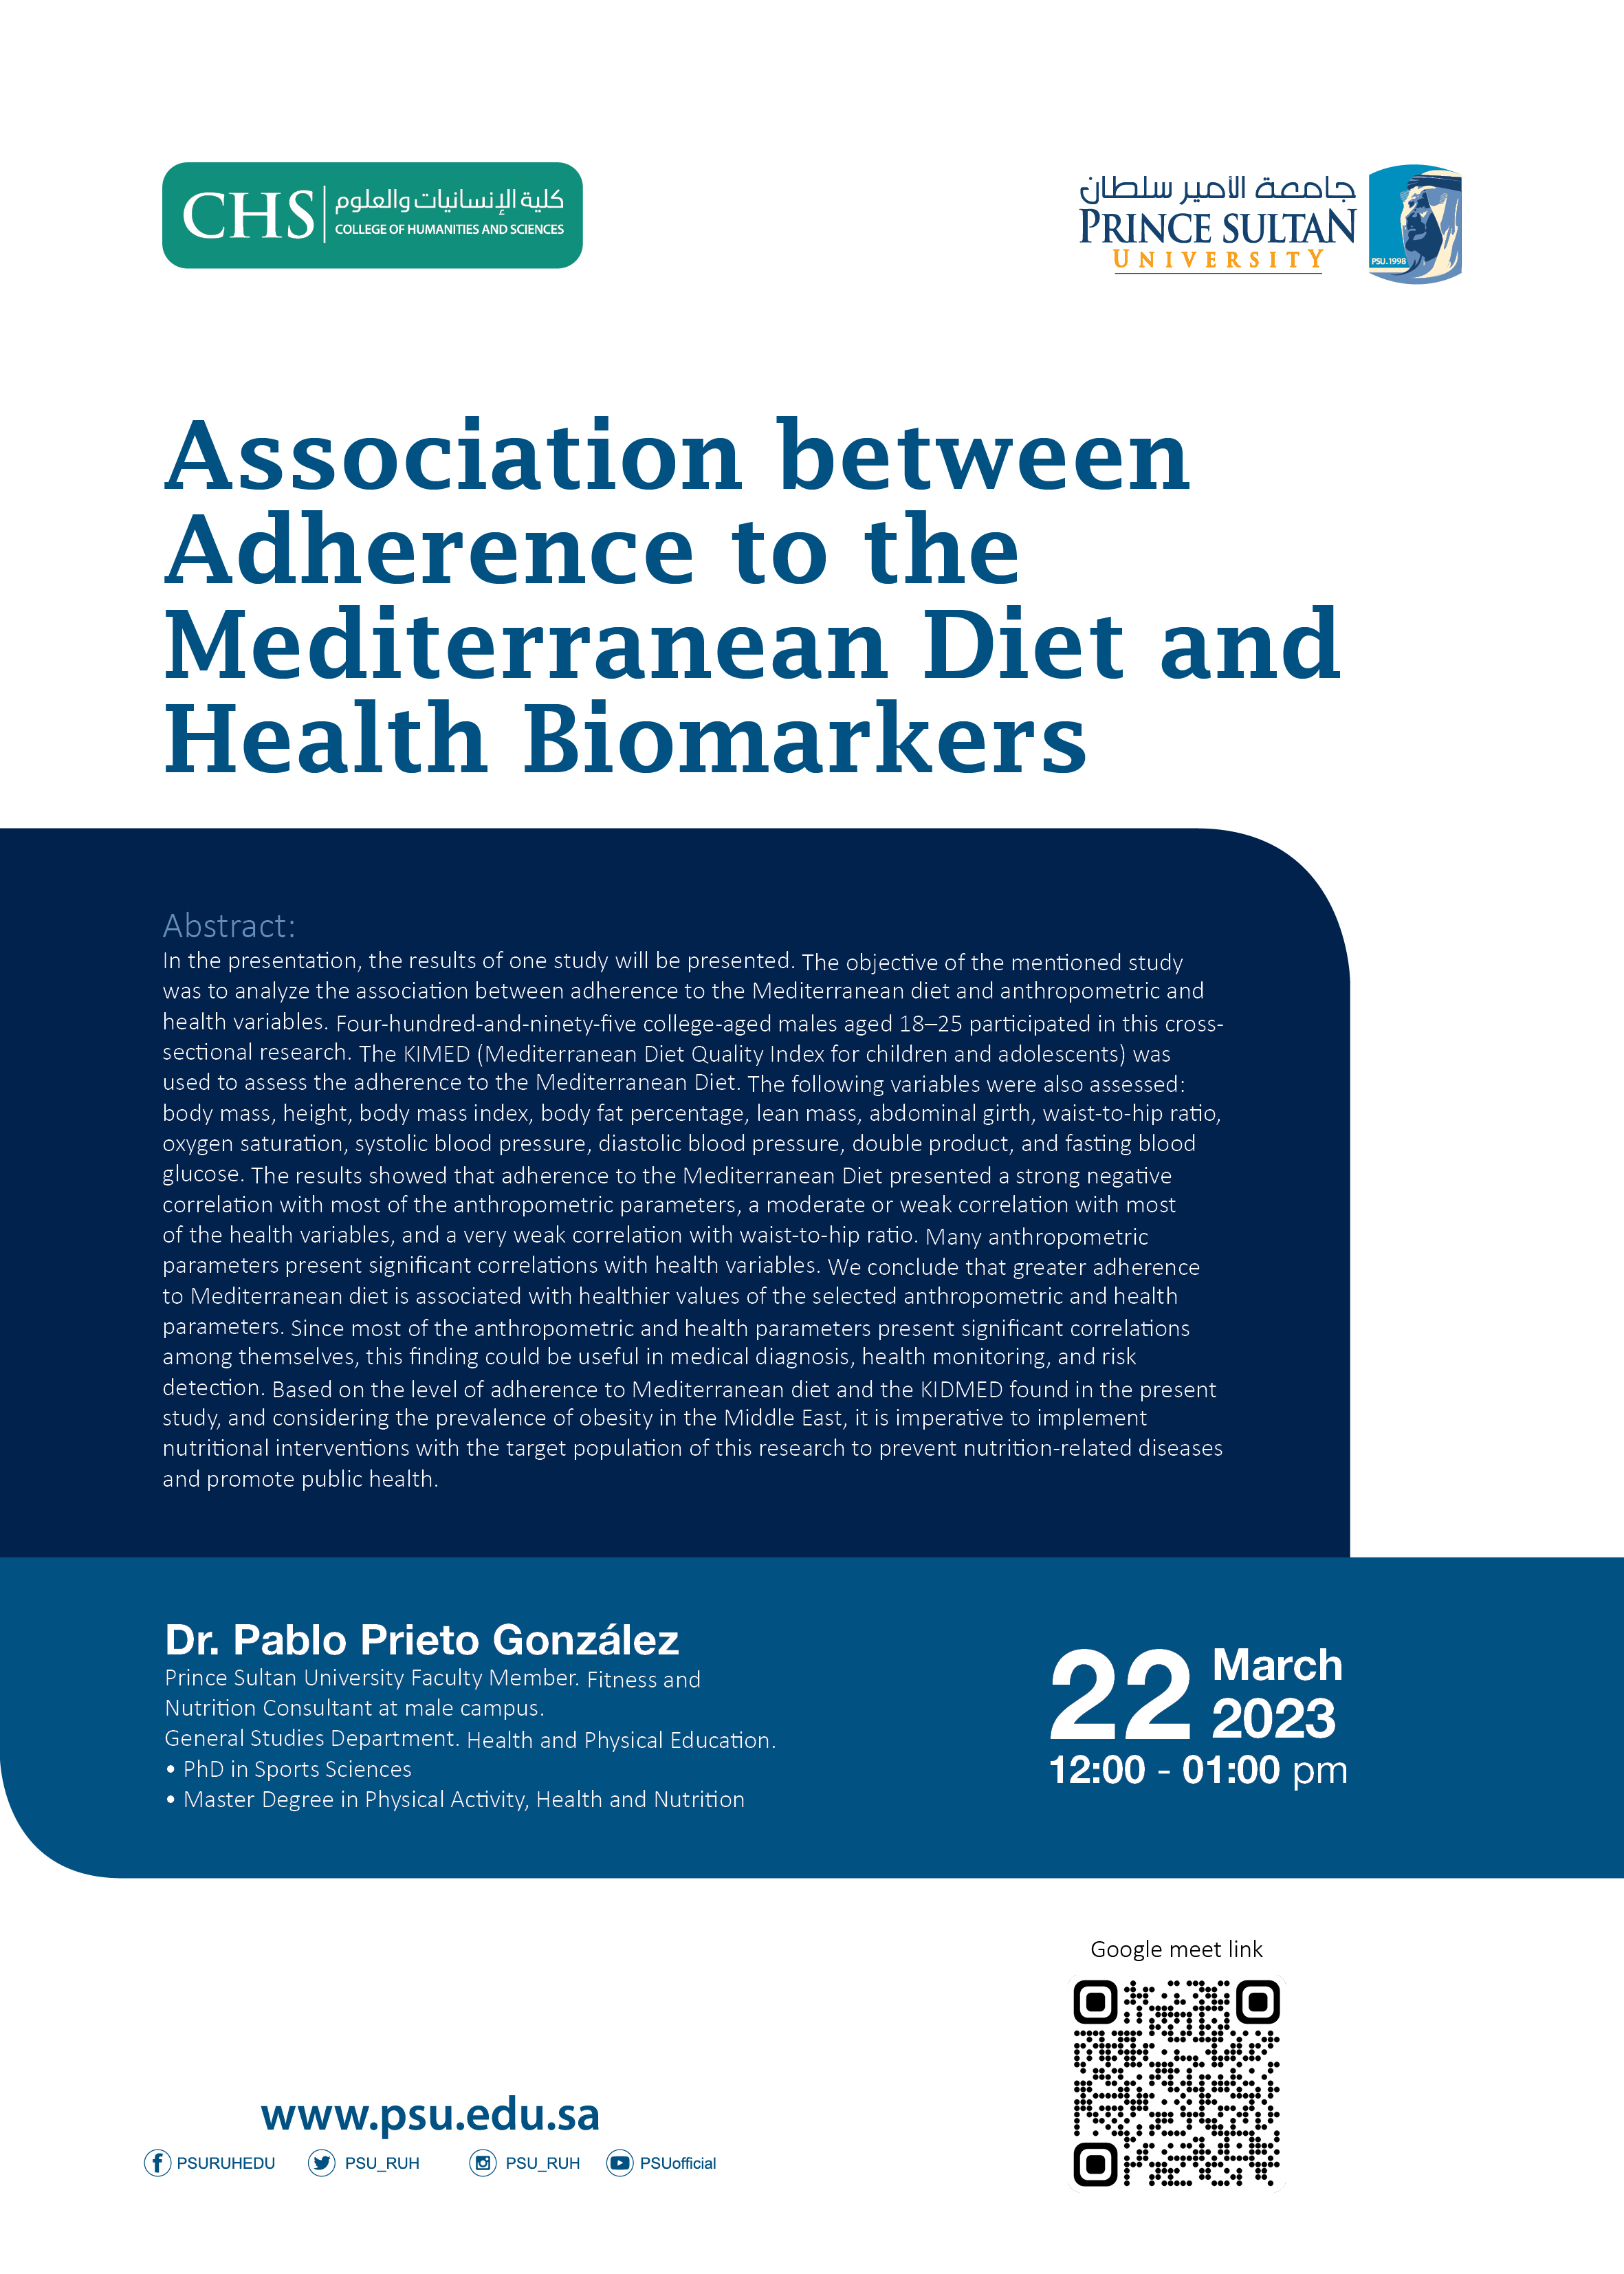 Association between Adherence to the Mediterranean Diet and Health Biomarkers